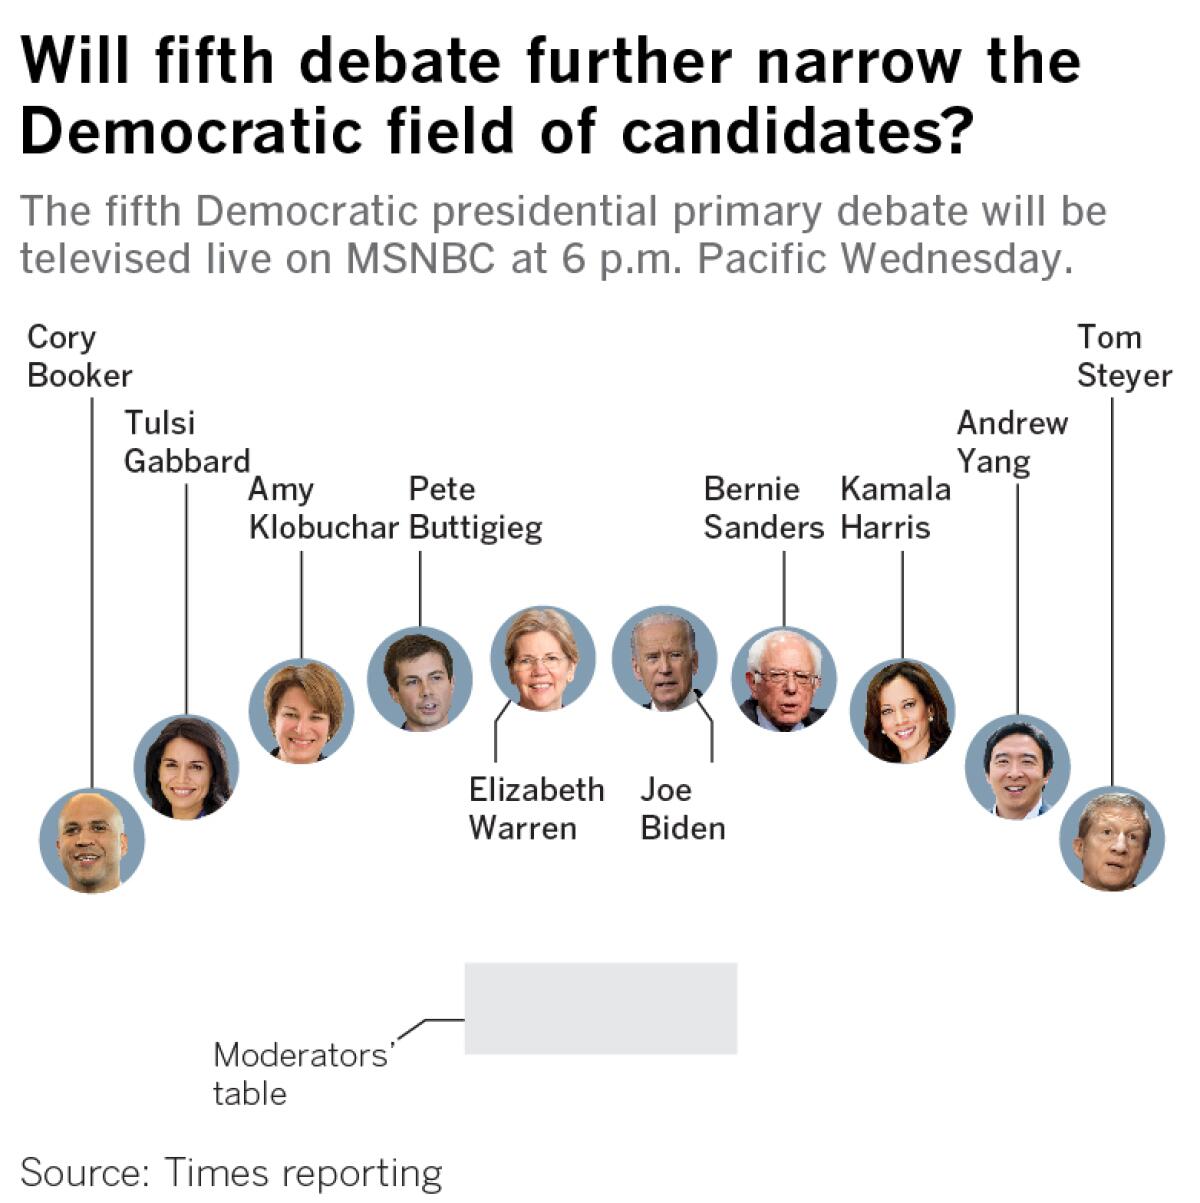 Will fifth debate further narrow the Democratic field of candidates? The fifth Democratic presidential primary debate will be televised live on MSNBC at 6 p.m. Pacific Wednesday.